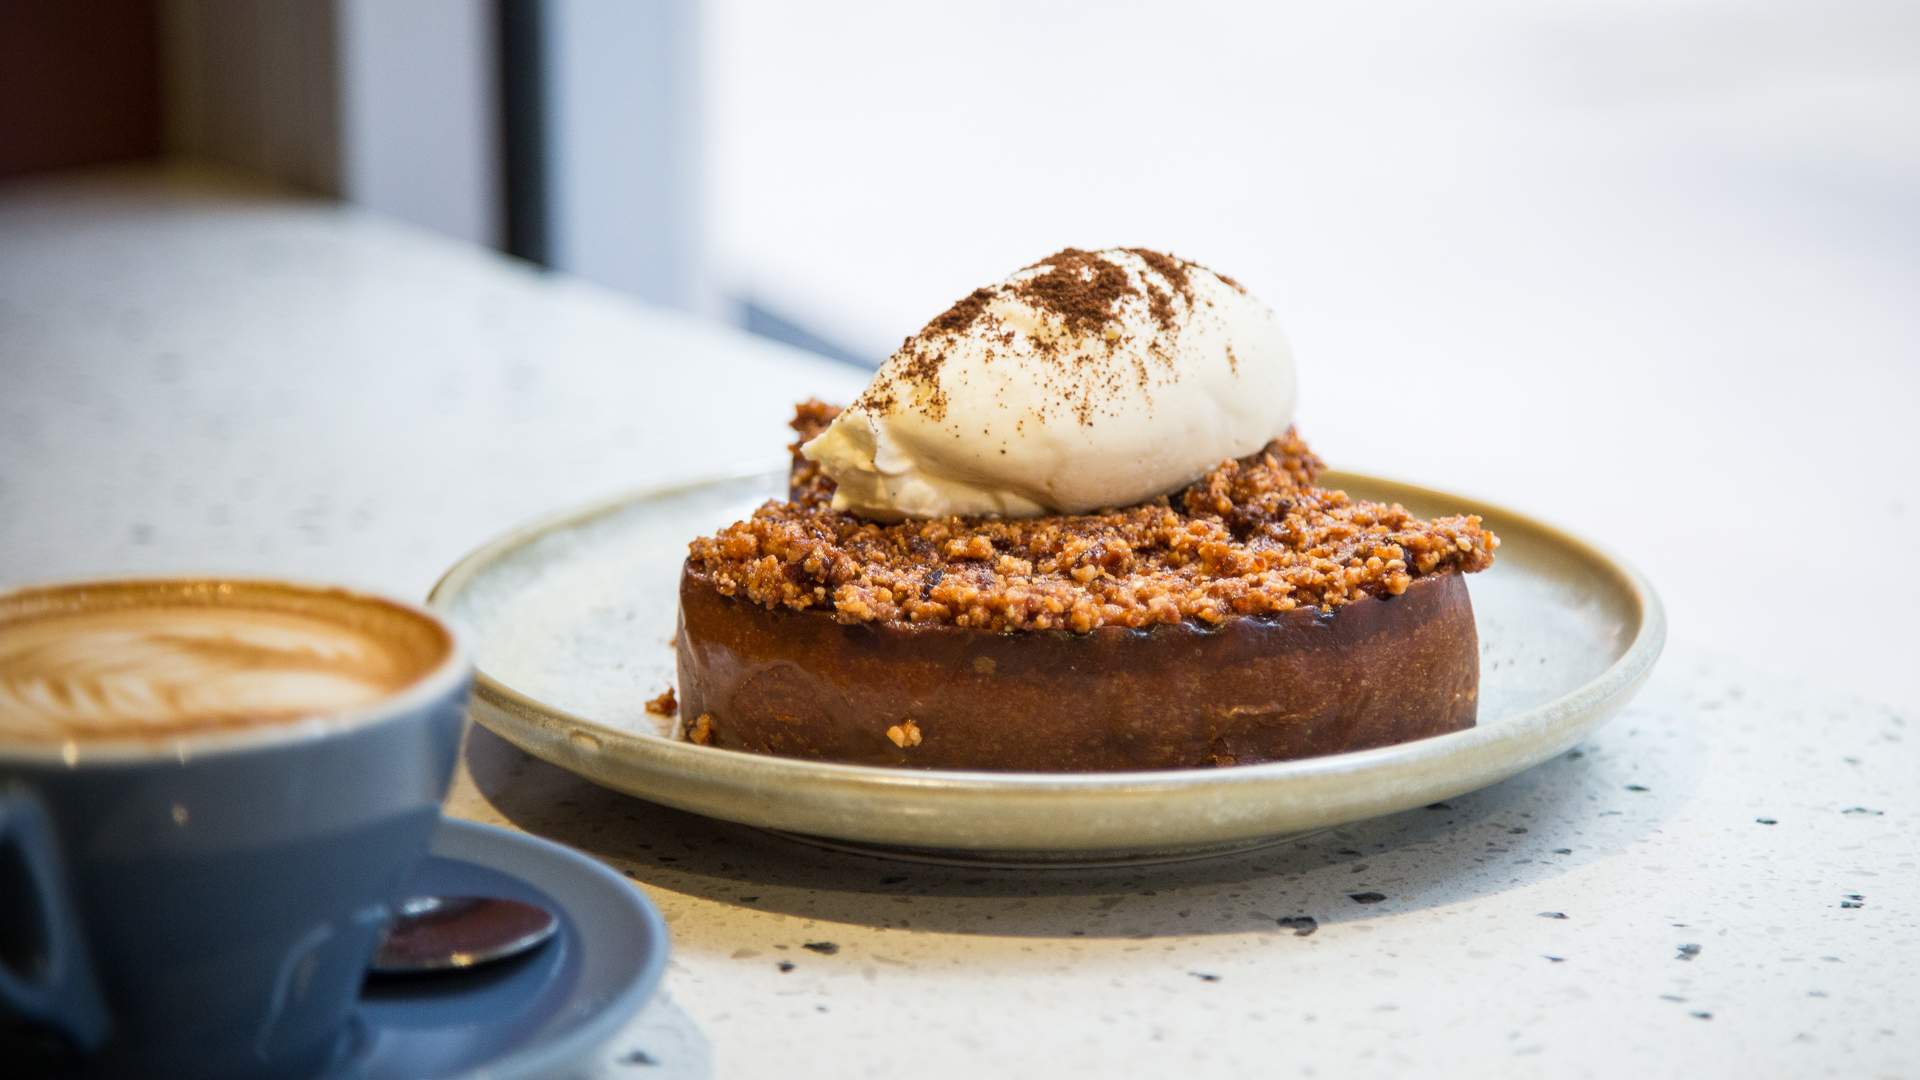 The Lower North Shore's Cavalier 2.0 Is Serving Up Breakfast Pasta and Thick-Cut Caramel Toast